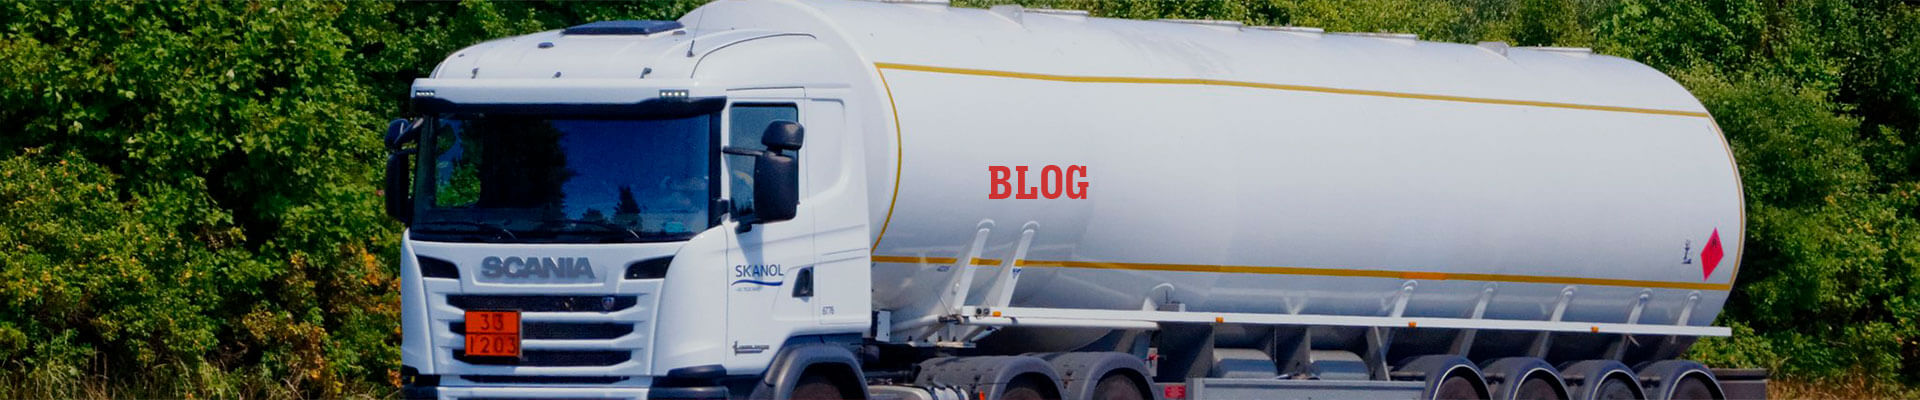 Purchasing and maintaining tanker trailers